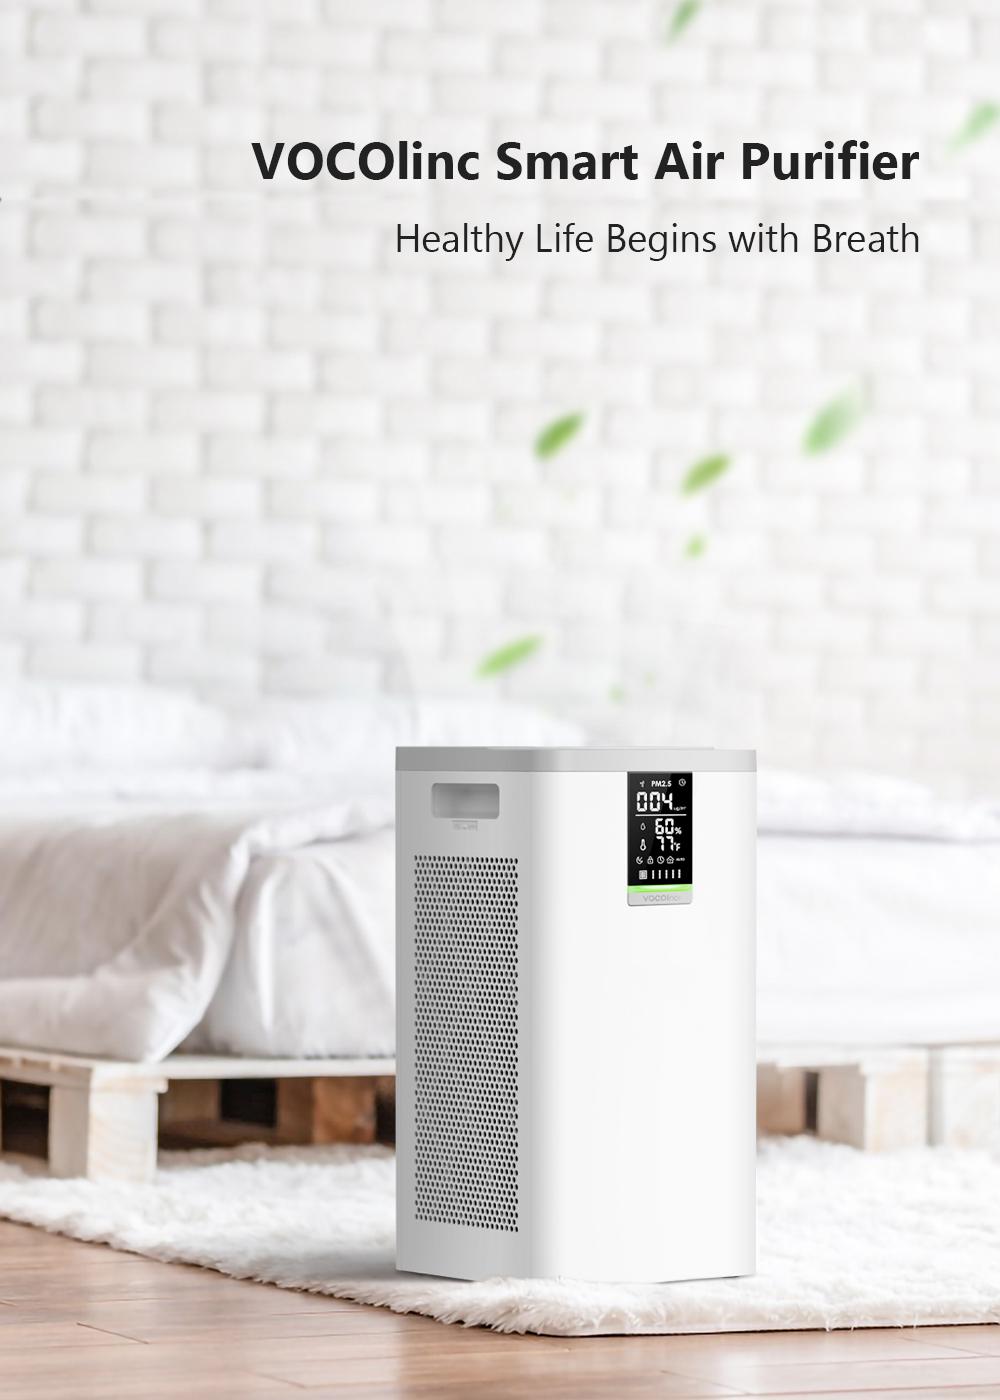 VOCOlinc Smart Air Purifier.Pre-filter, advanced HEPA filter, and hive pattern activated carbon filter can effectively block the spread of pet hair, dust, smoke, PM2.5, odor, formaldehyde, bacteria, fungi, and other substances, and give you more pure air.